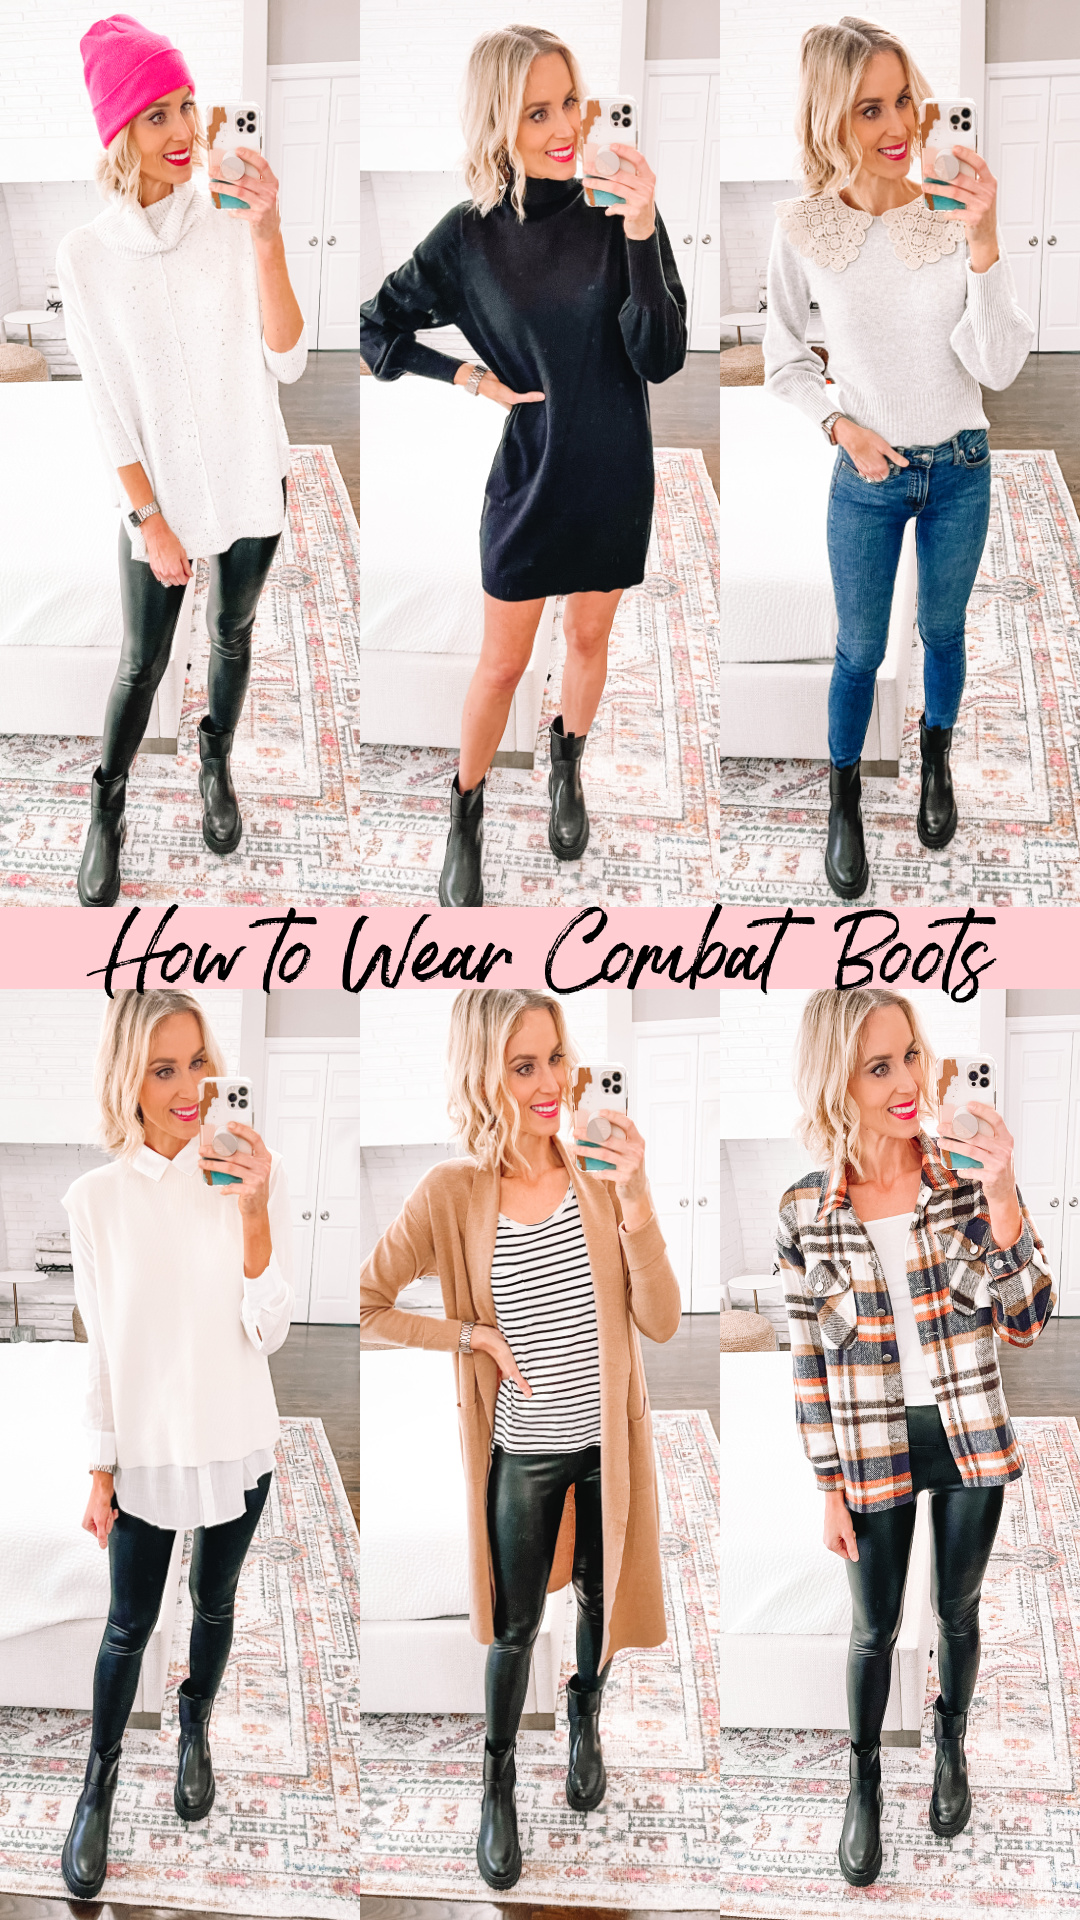 A New Way To Wear Combat Boots - Somewhere, Lately